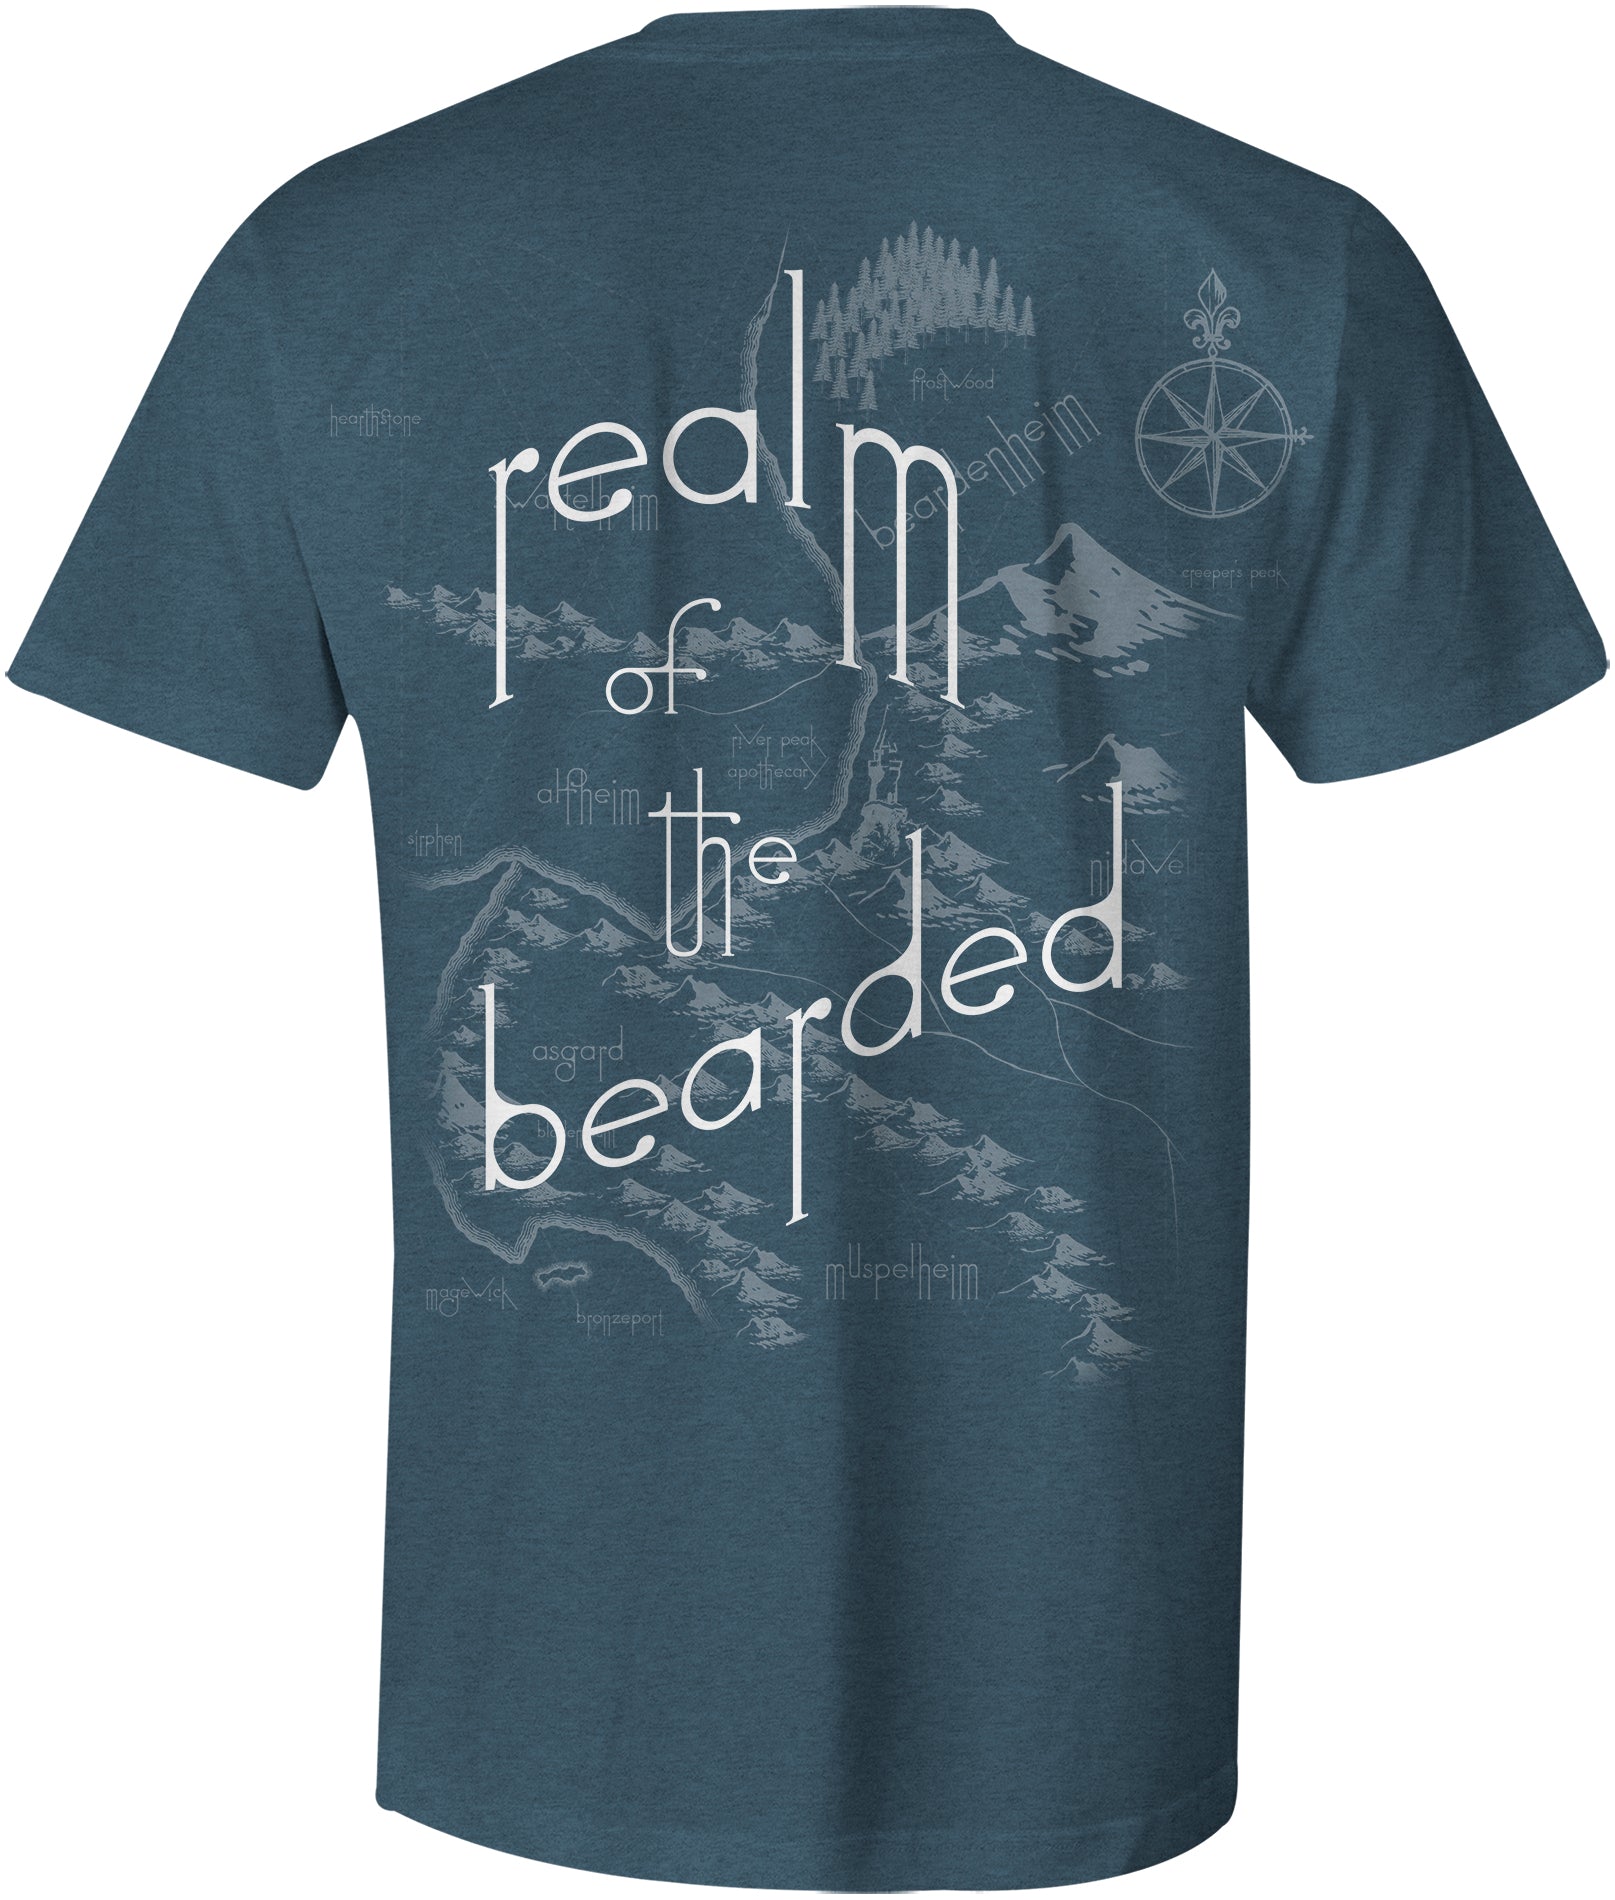 River Peak Realm of the Bearded T-Shirt {3 Colors}